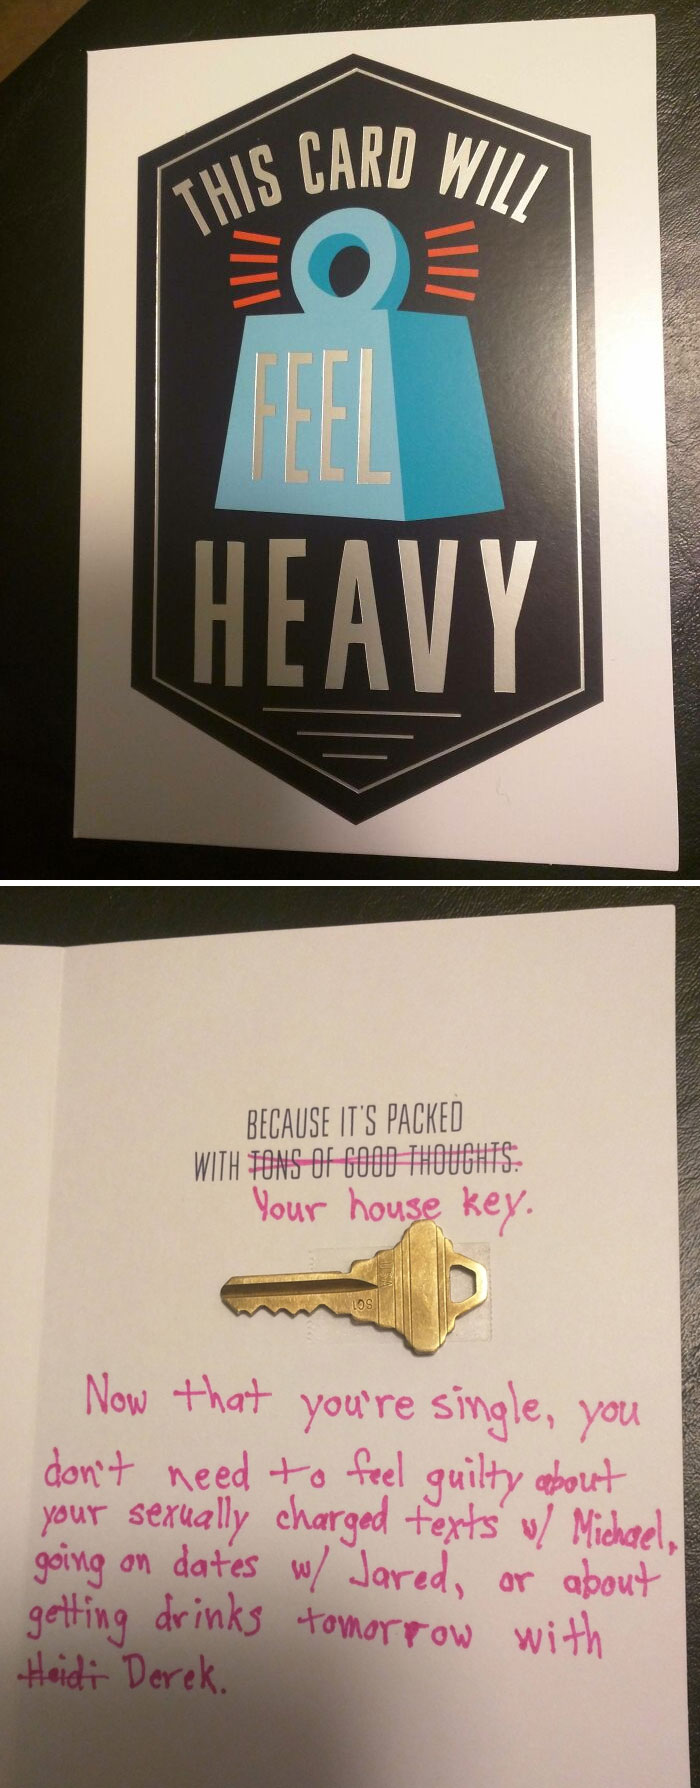 Ex revenge - Cheating in a relationship - This Card Will Mi Feel Heavy Because It'S Packed With Tons Of Good Thoughts Your house key. Now that you're single, you don't need to feel guilty about your sexually charged texts w Michael, going on dates w Jared